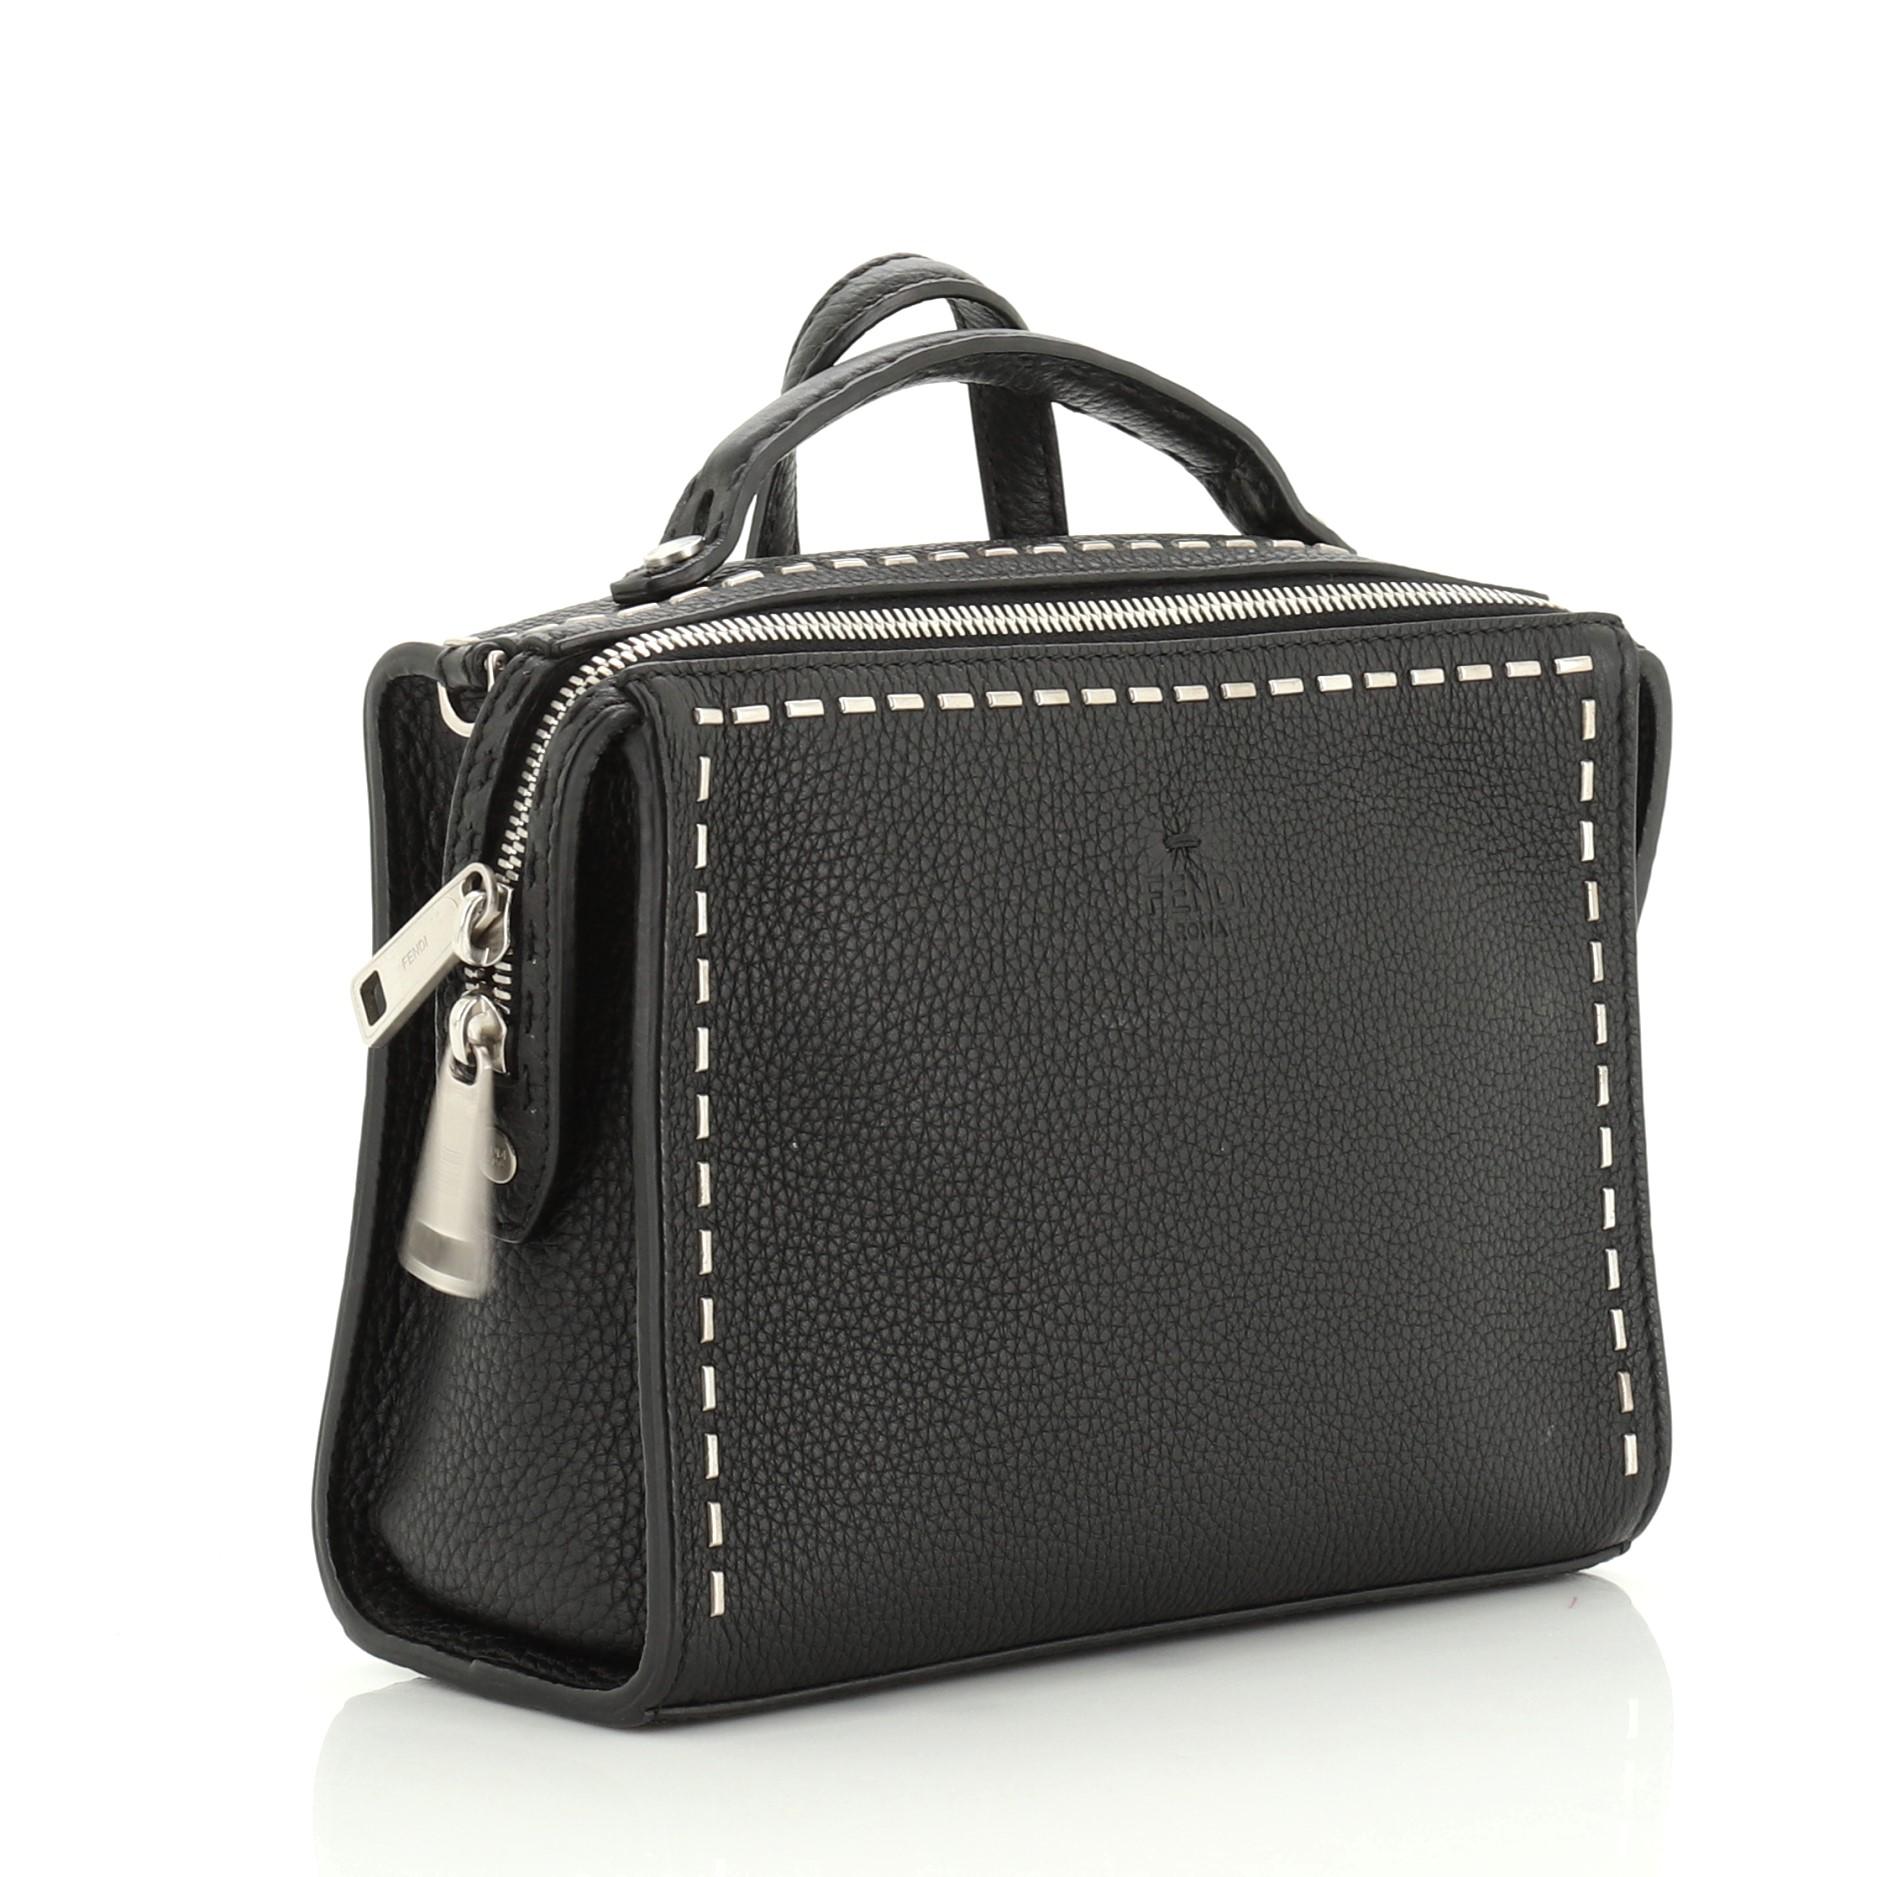 This Fendi Selleria Messenger Bag Studded Leather Mini, crafted in black leather, features a leather top handle, and matte silver-tone hardware. Its zip closure opens to a black fabric interior. 

Estimated Retail Price: $2,100
Condition: Excellent.